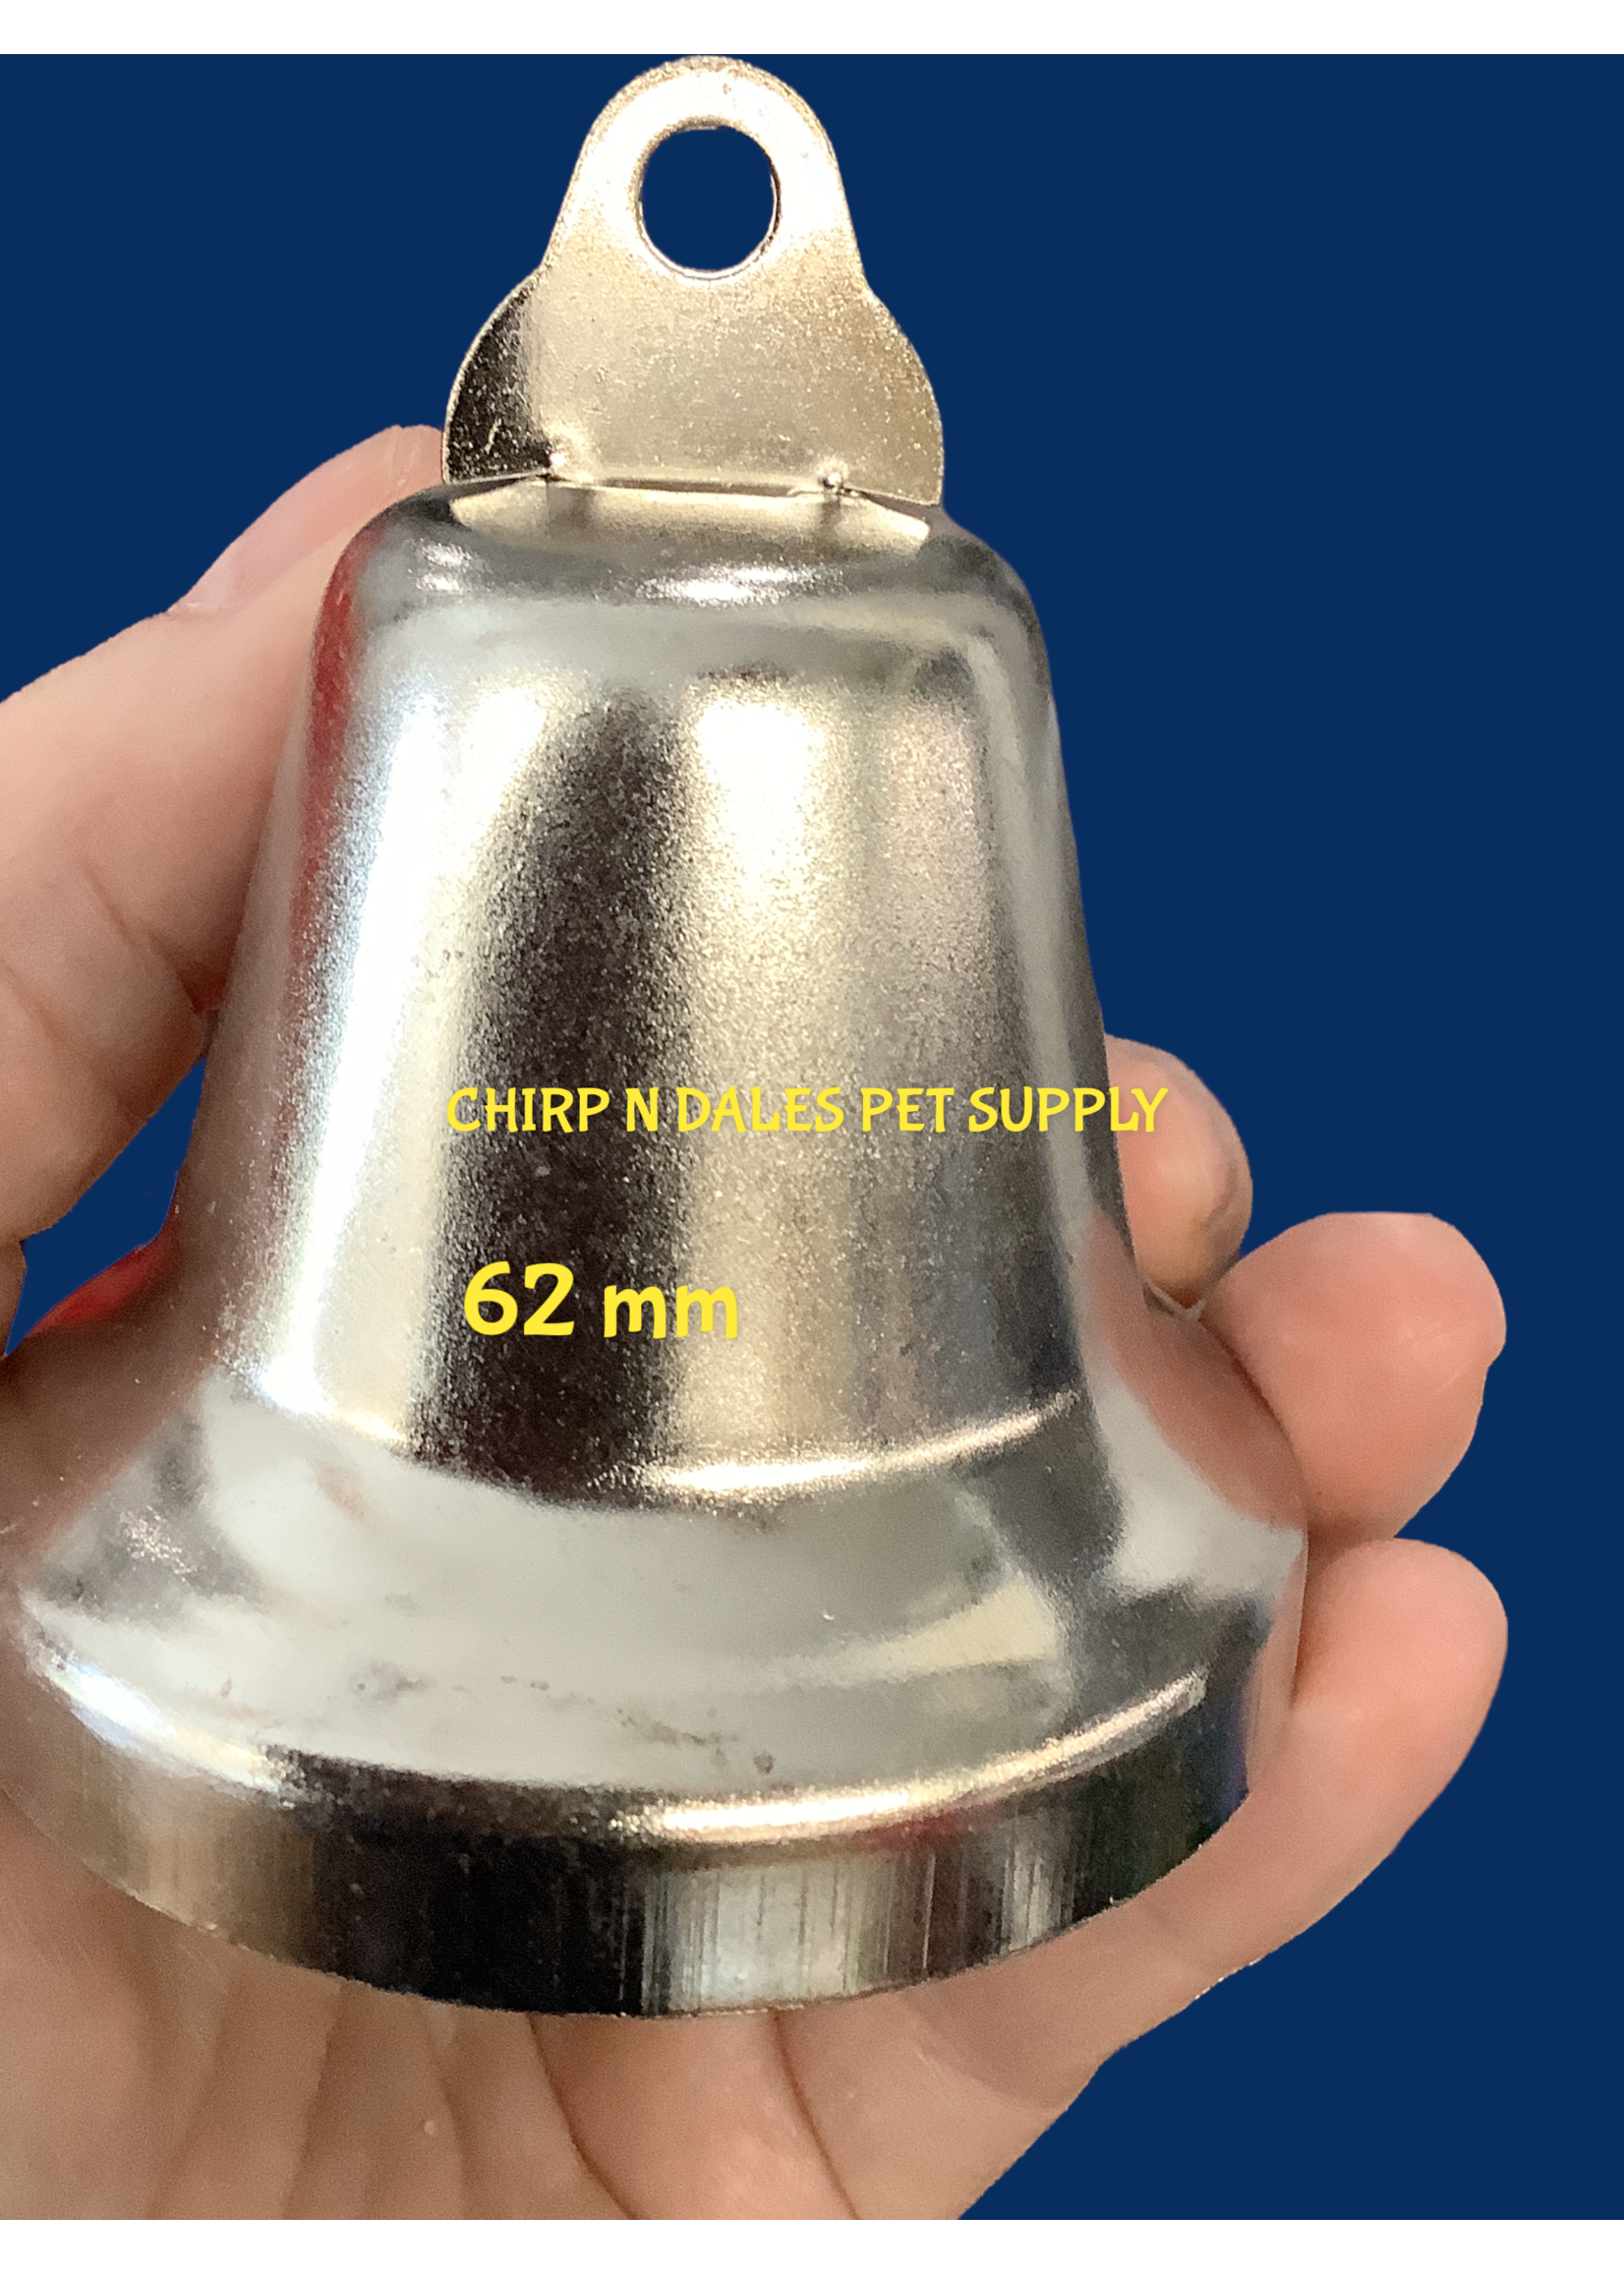 Chirp N Dales Nickel Plated Non Toxic Liberty Bells